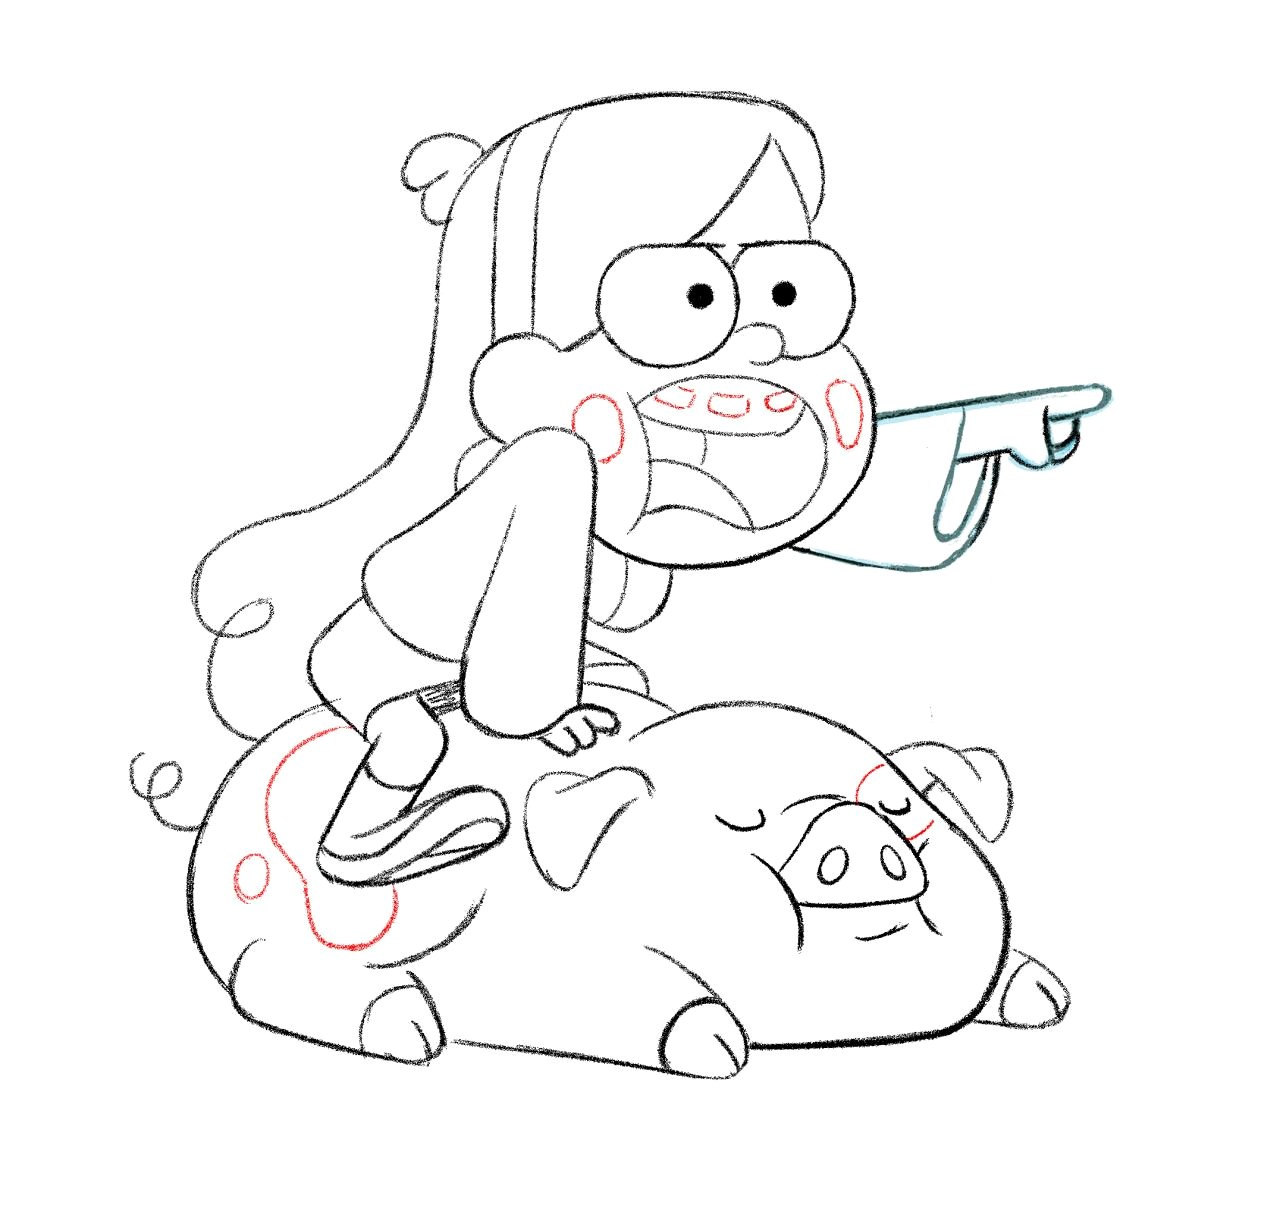 Gravity Falls Mabel and Waddles from Gravity Falls